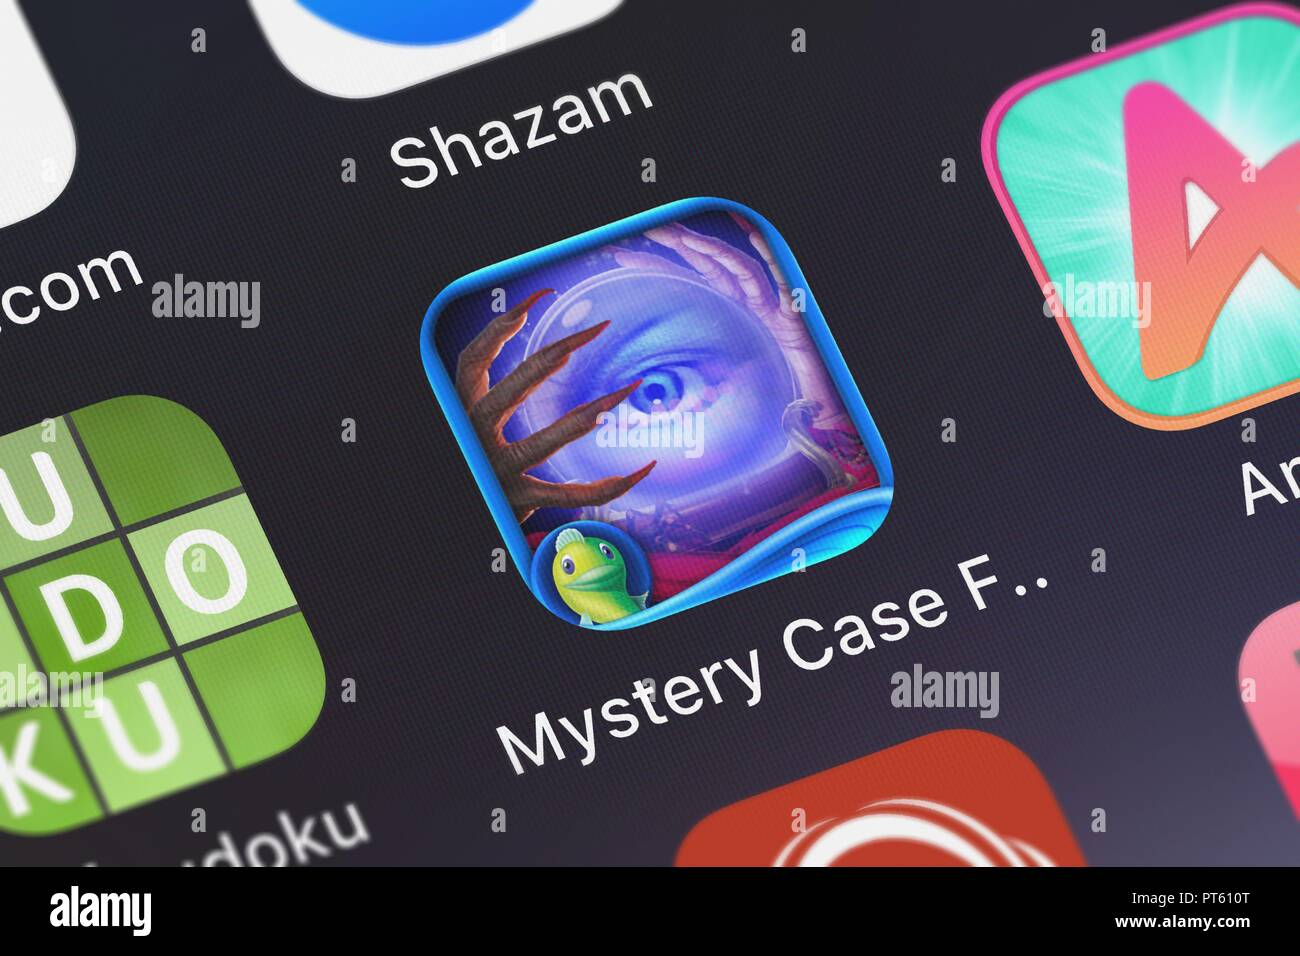 London, United Kingdom - October 06, 2018: Close-up shot of Big Fish Games, Inc's popular app Mystery Case Files: Madame Fate. Stock Photo